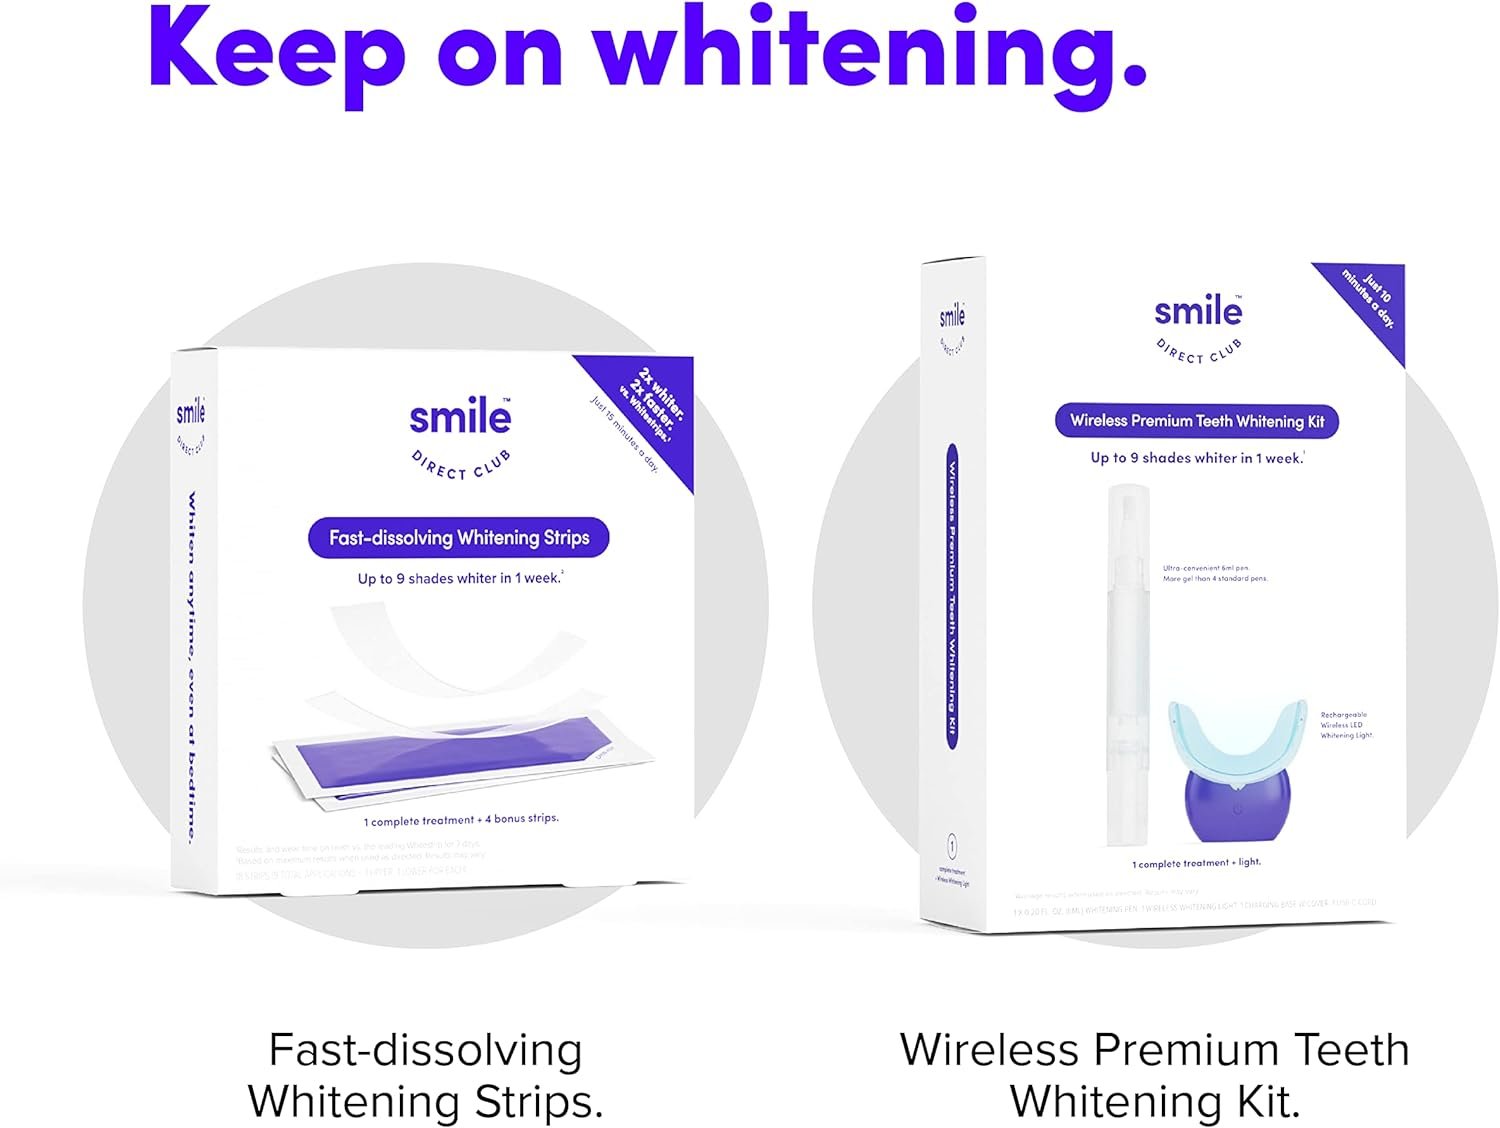 SmileDirectClub Teeth Whitening 4ml Stain Preventer - Blocks Stains for Up to 4 Hours - Professional Strength Hydrogen Peroxide - Pain Free and Enamel Safe